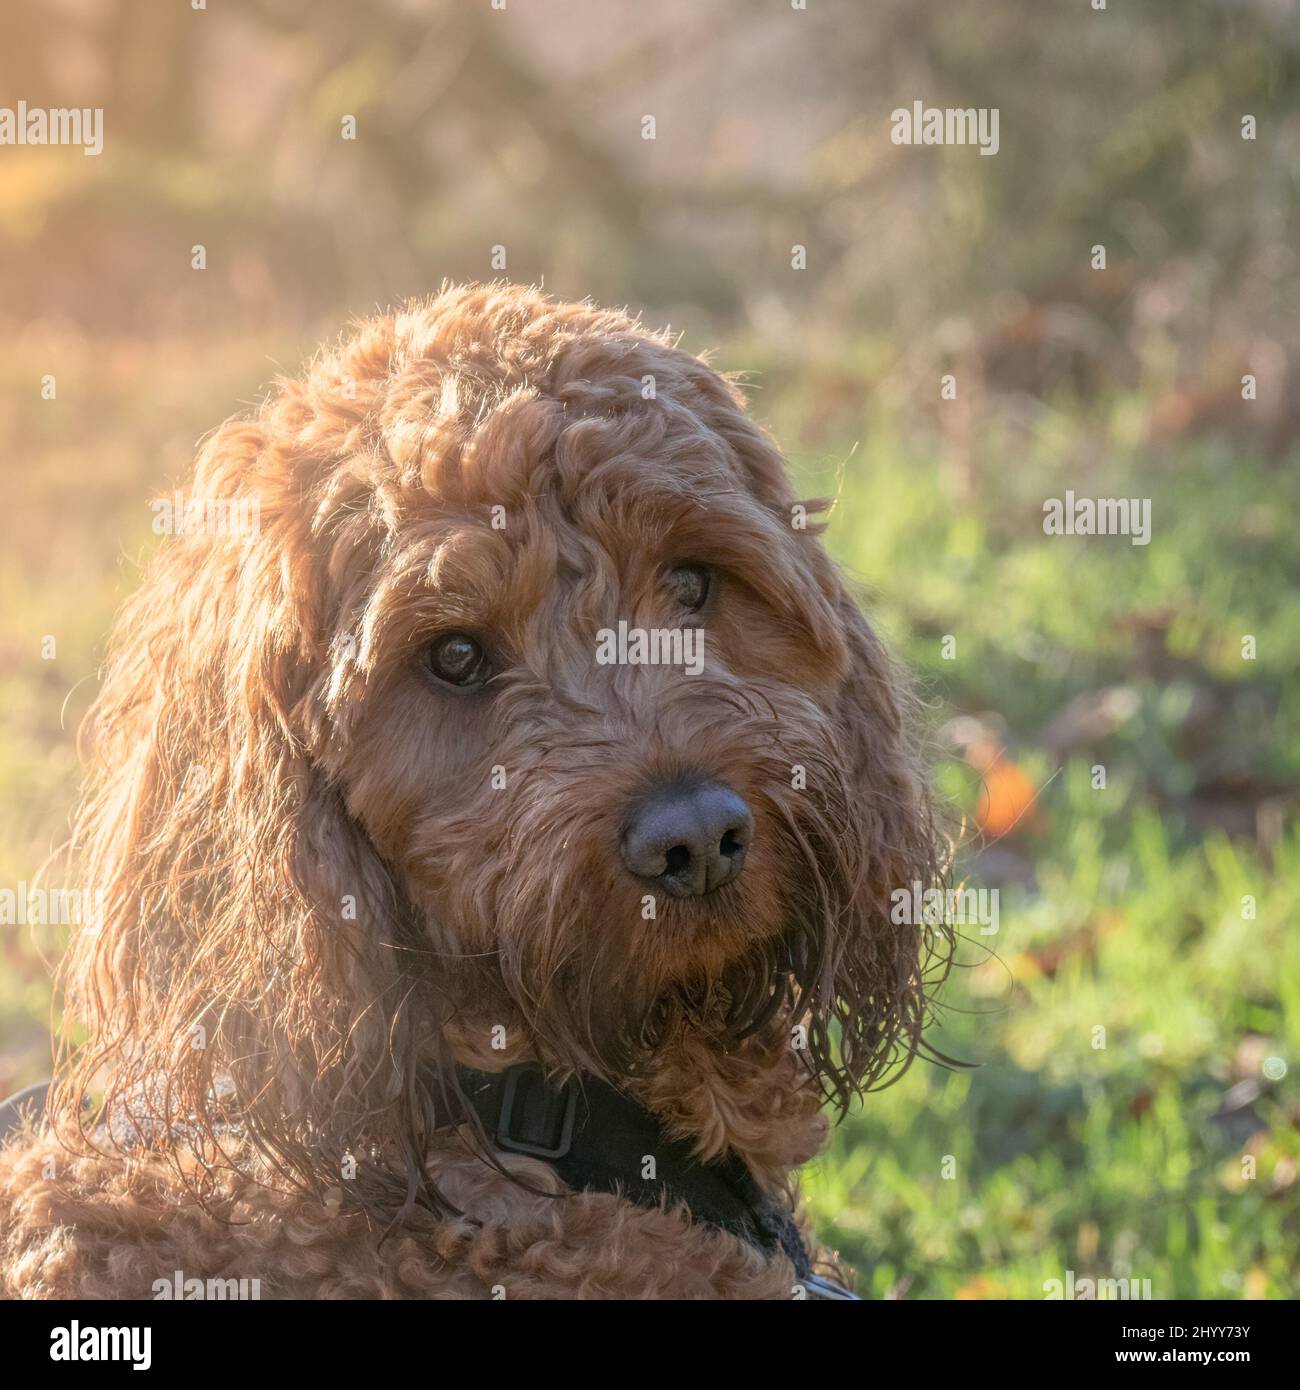 A red cockapoo dog sitting attentively during an outdoor portrait session Stock Photo